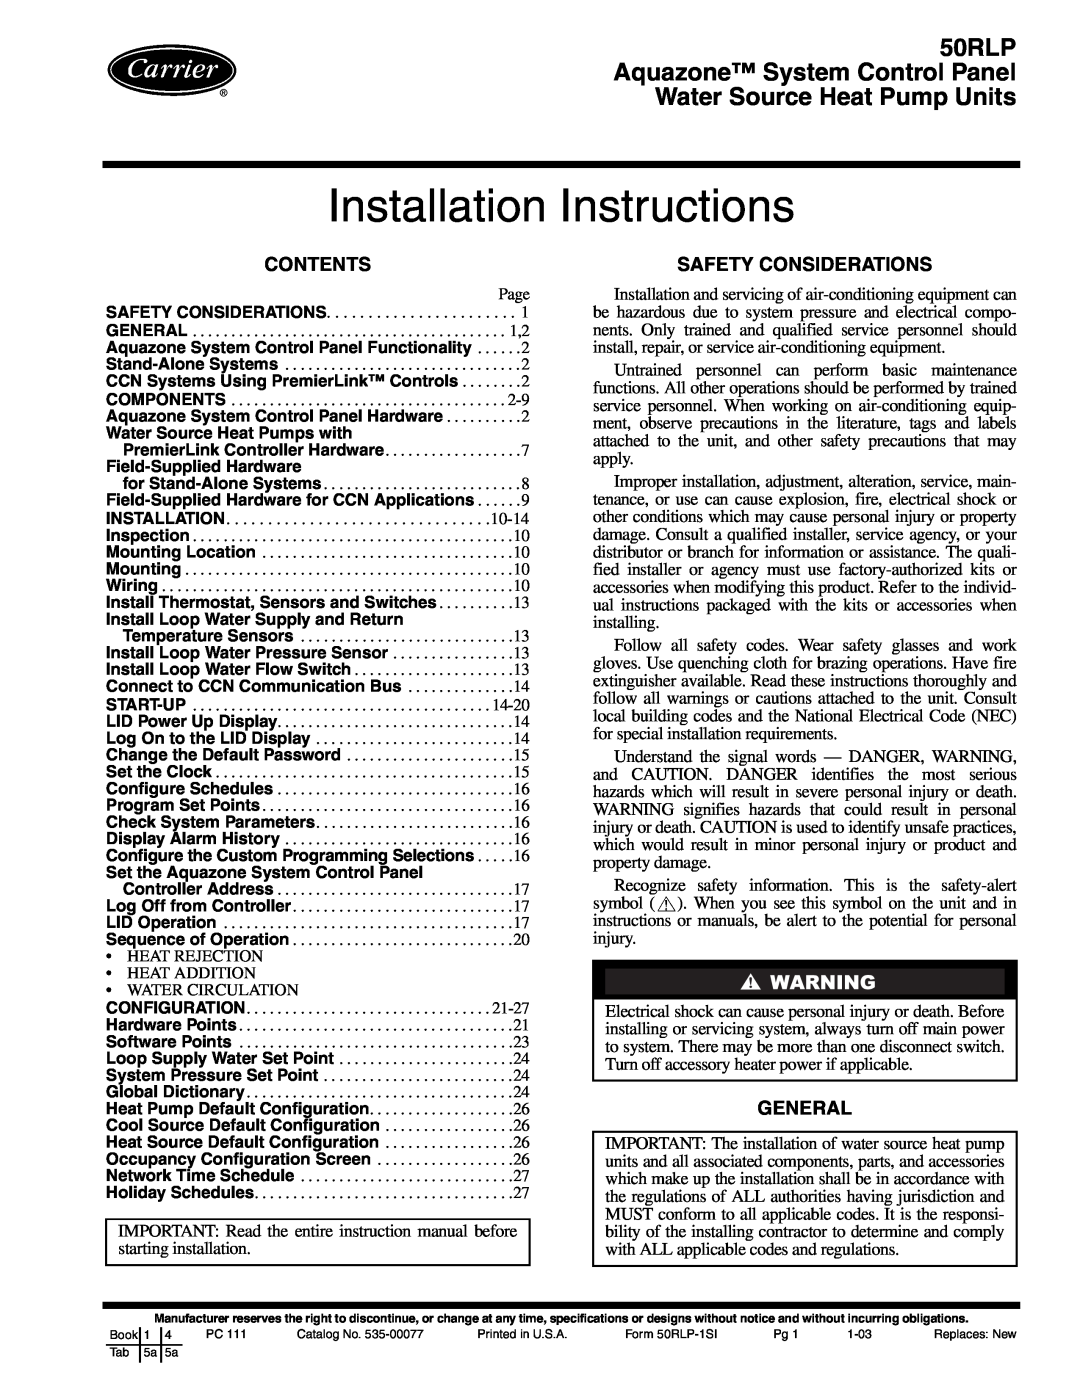 Carrier 50RLP installation instructions Contents, Safety Considerations, General, Water Source Heat Pumps with 